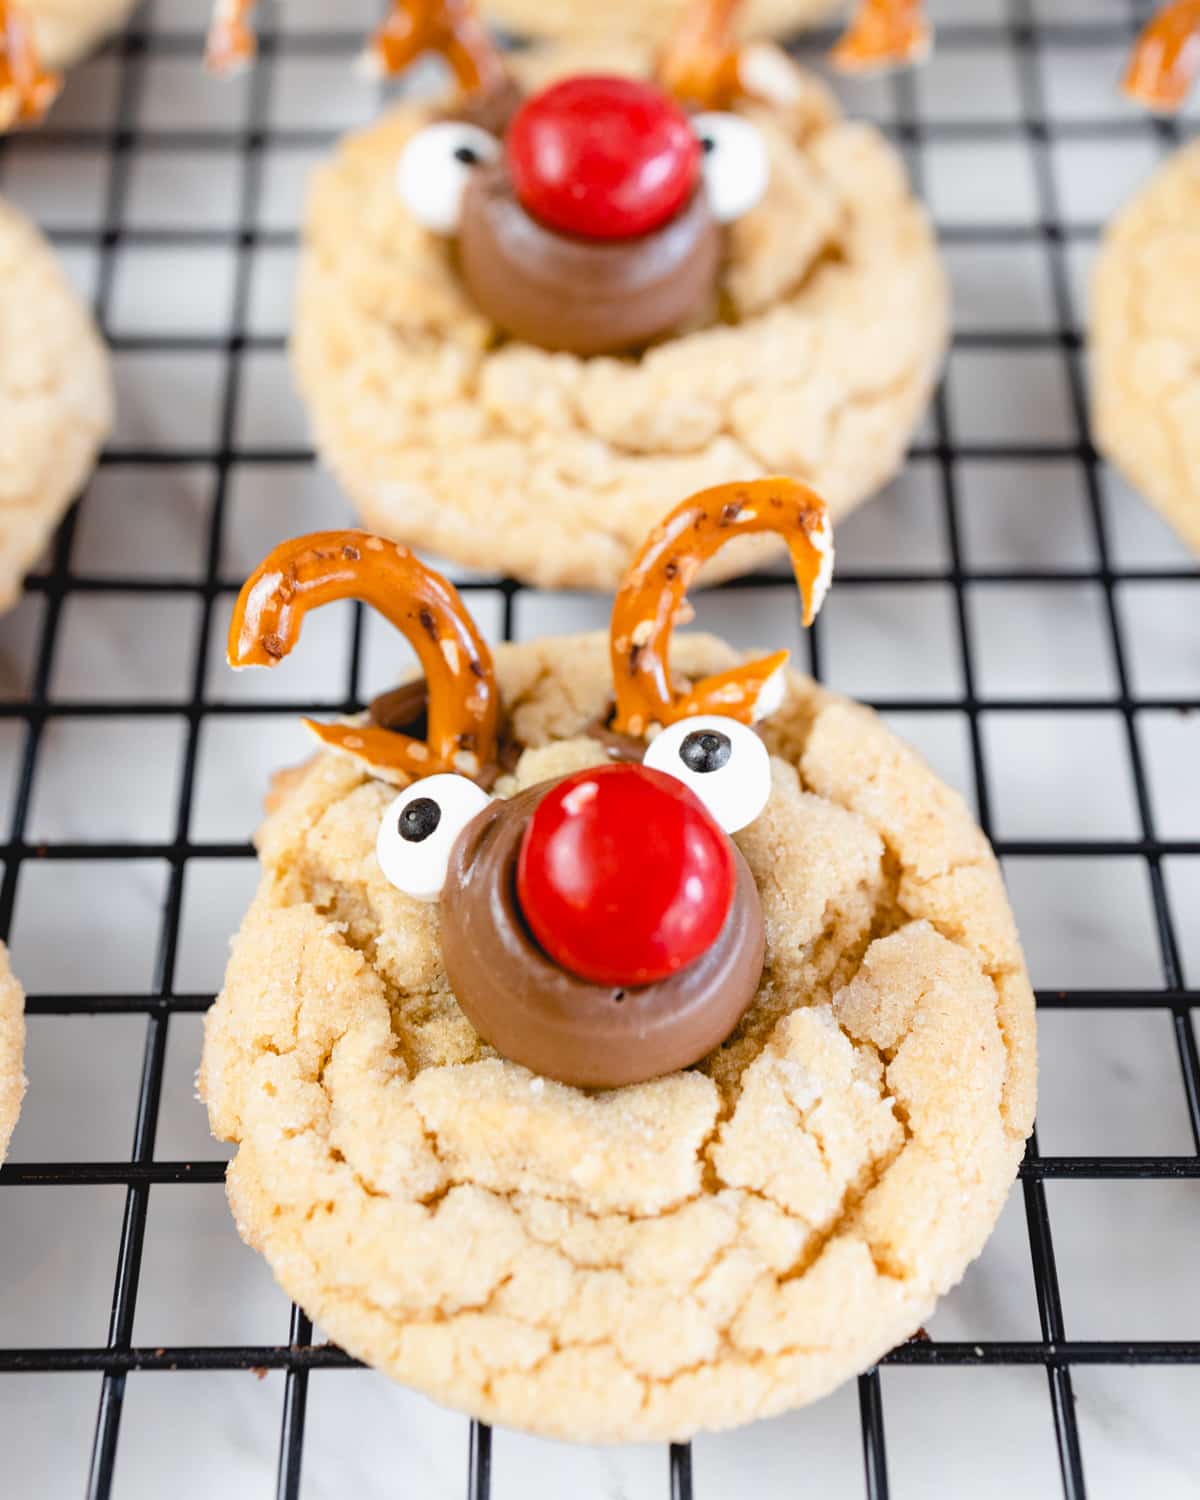 Close up of a reindeer cookie on a wire rack.